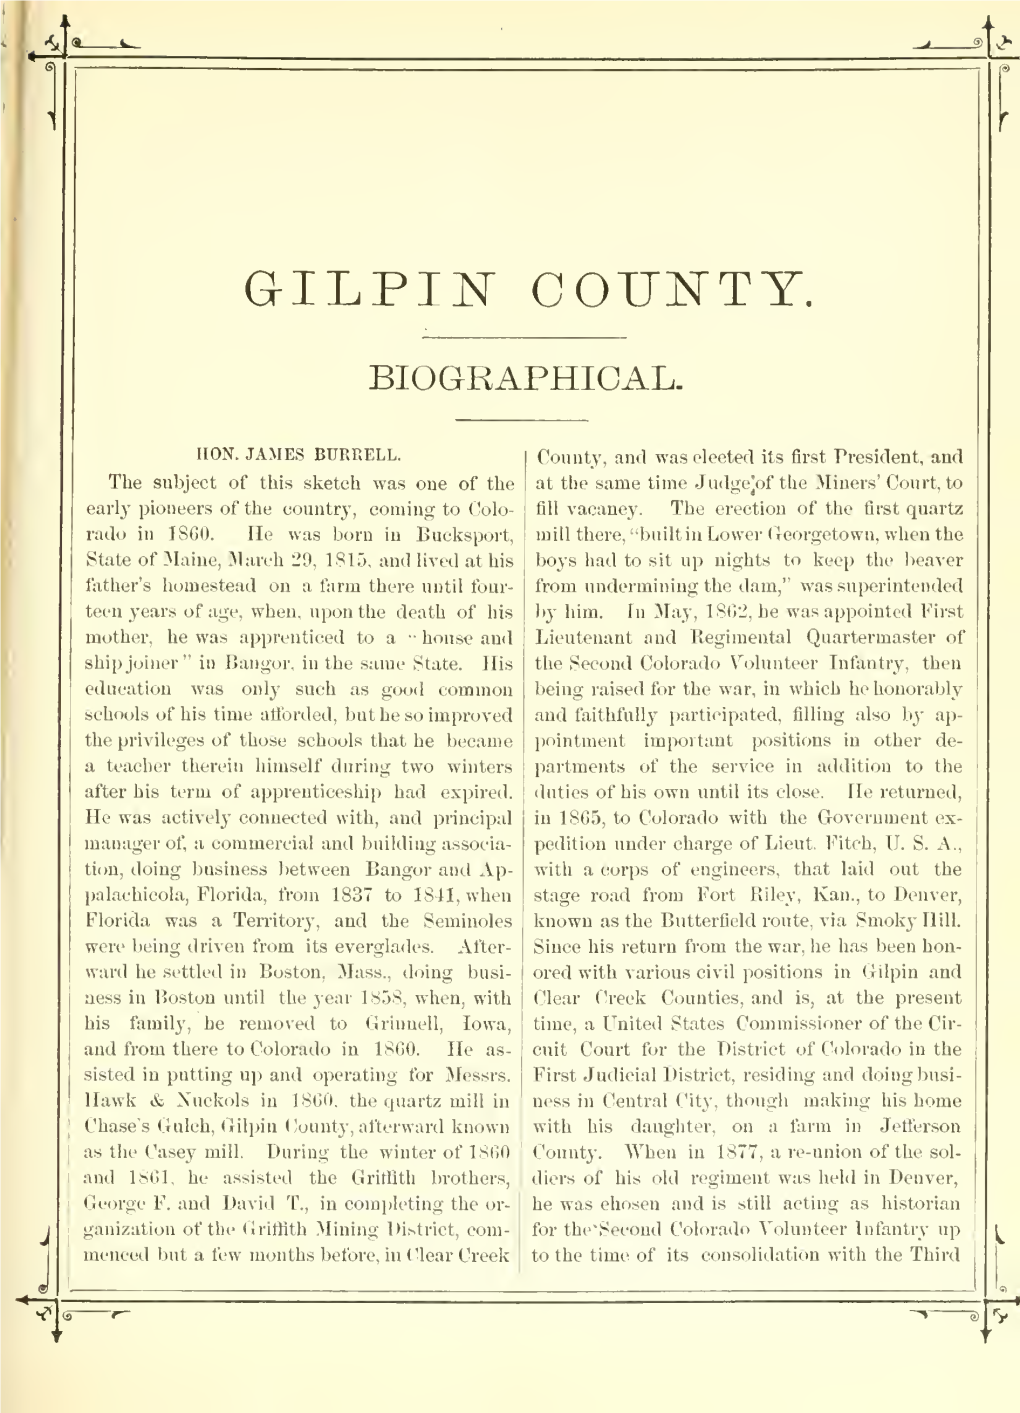 Gilpin County. Biographical